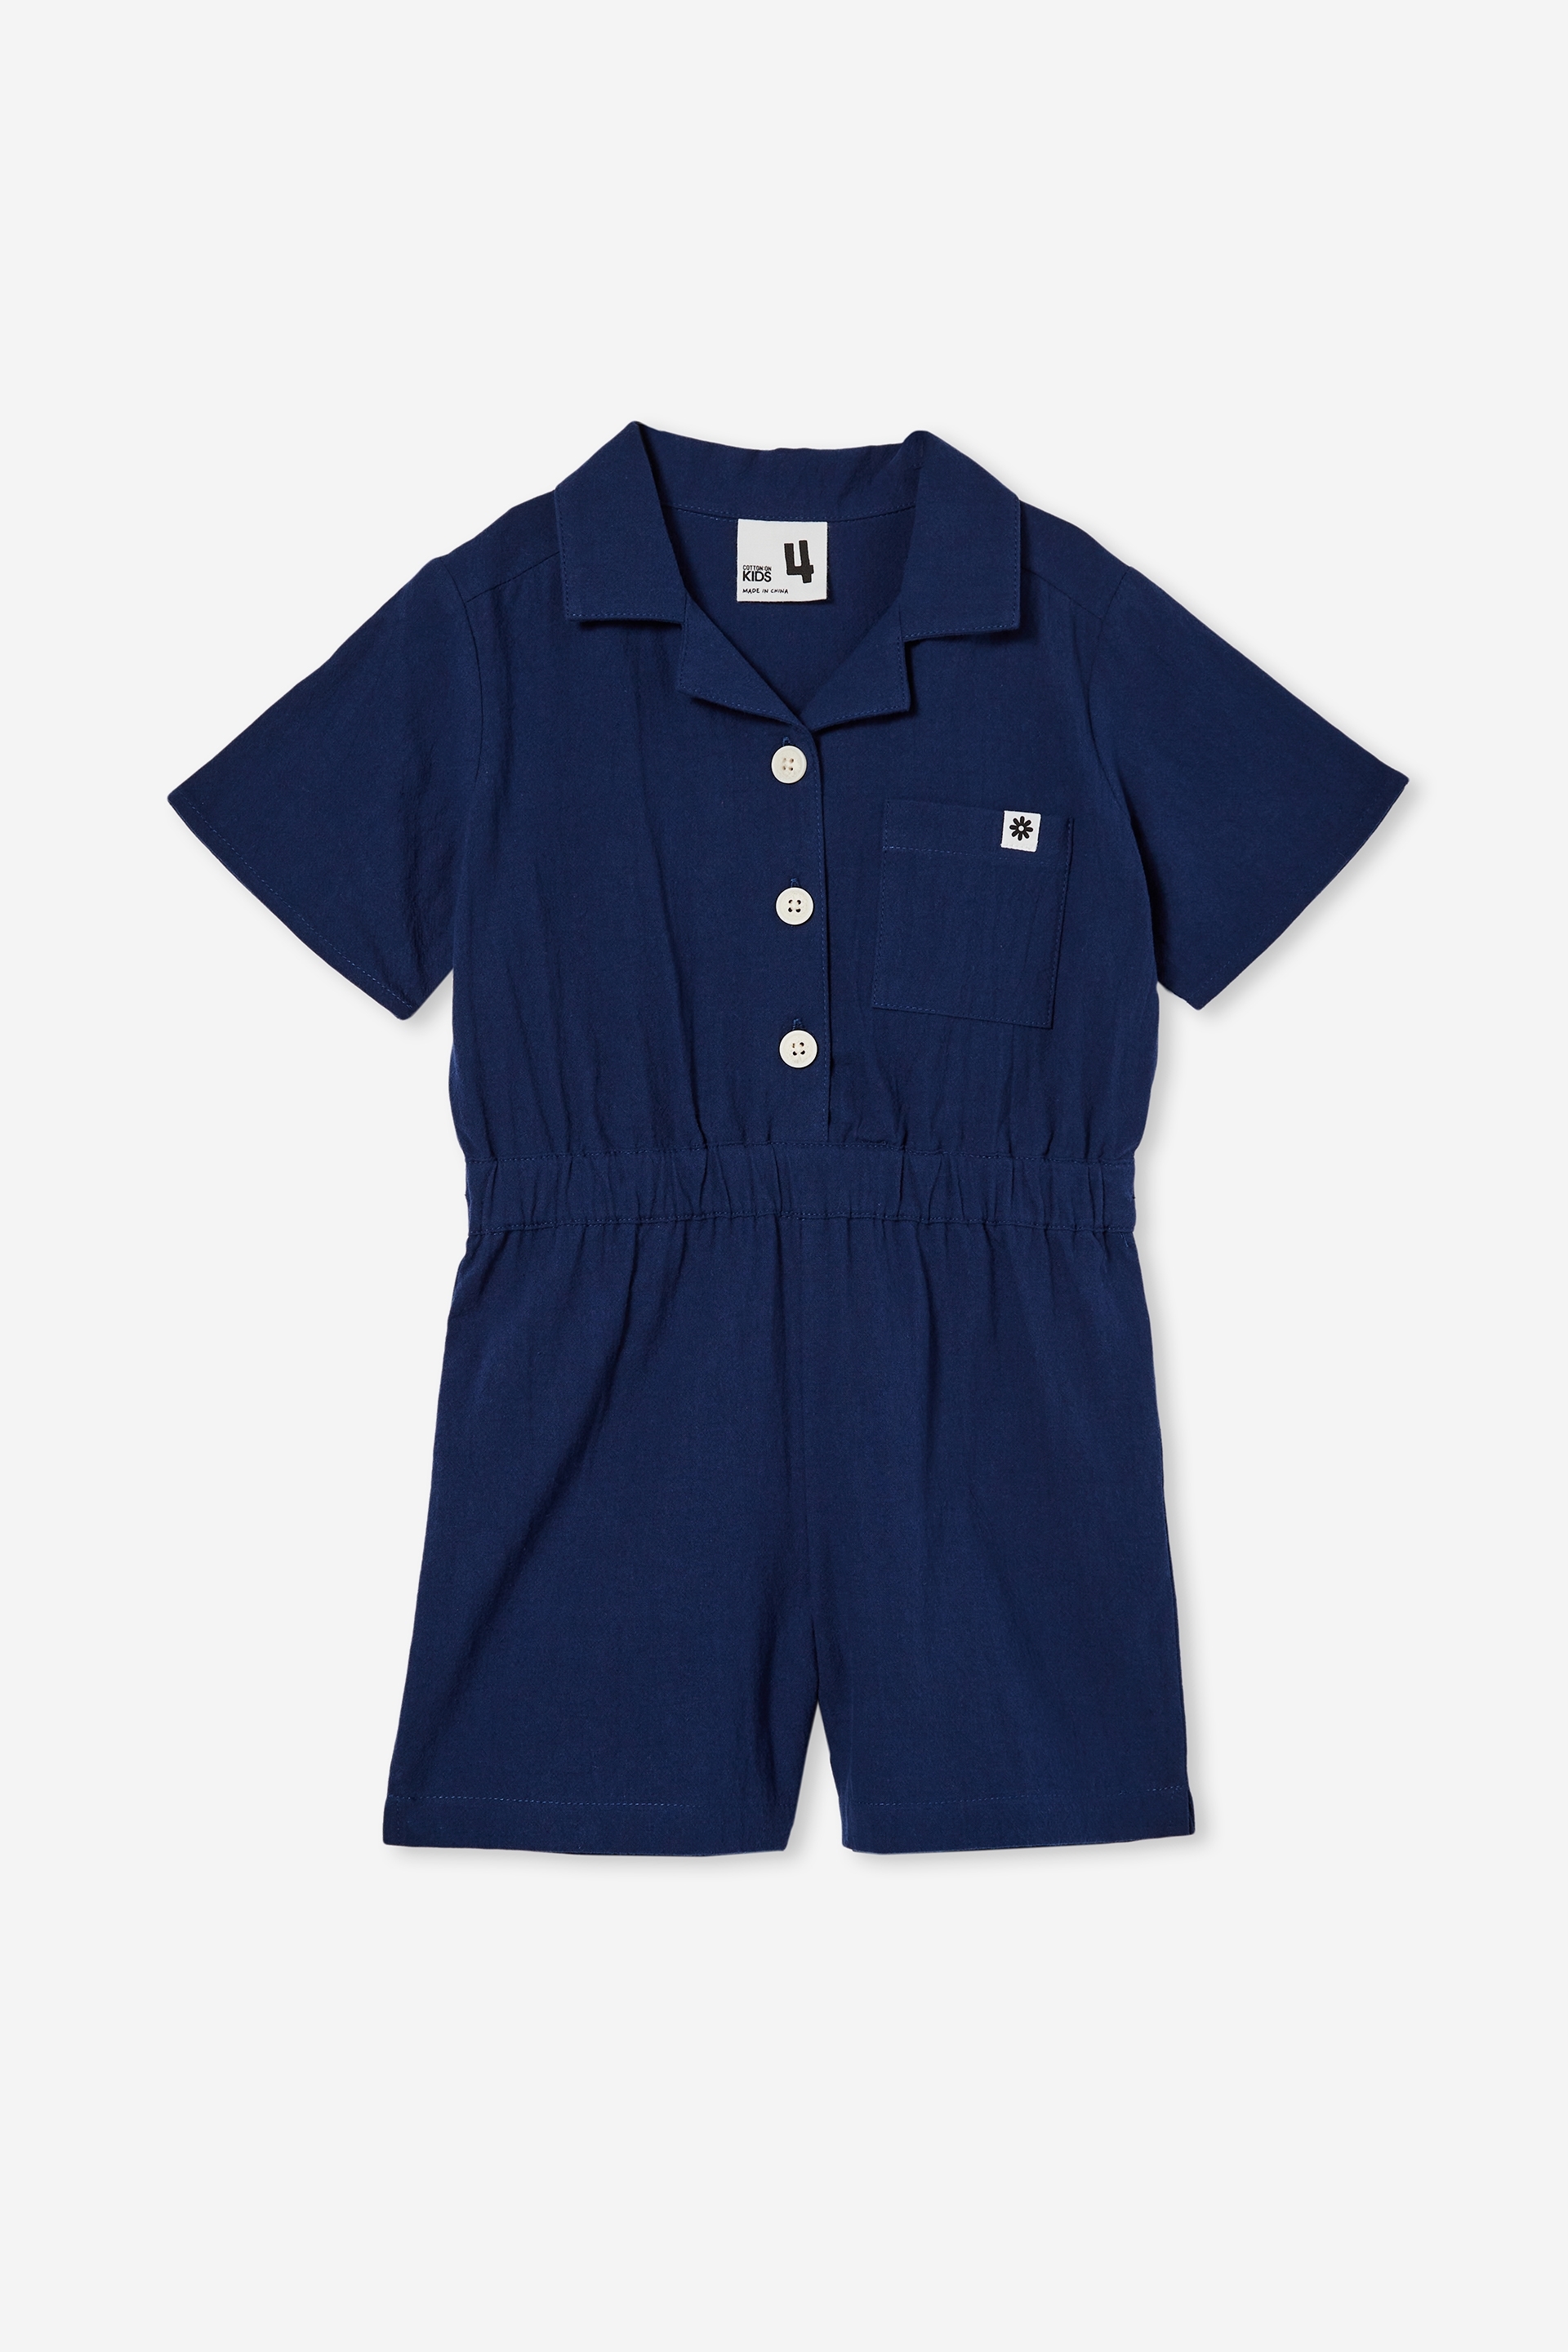 Cotton On Kids - Holly Playsuit - In the navy